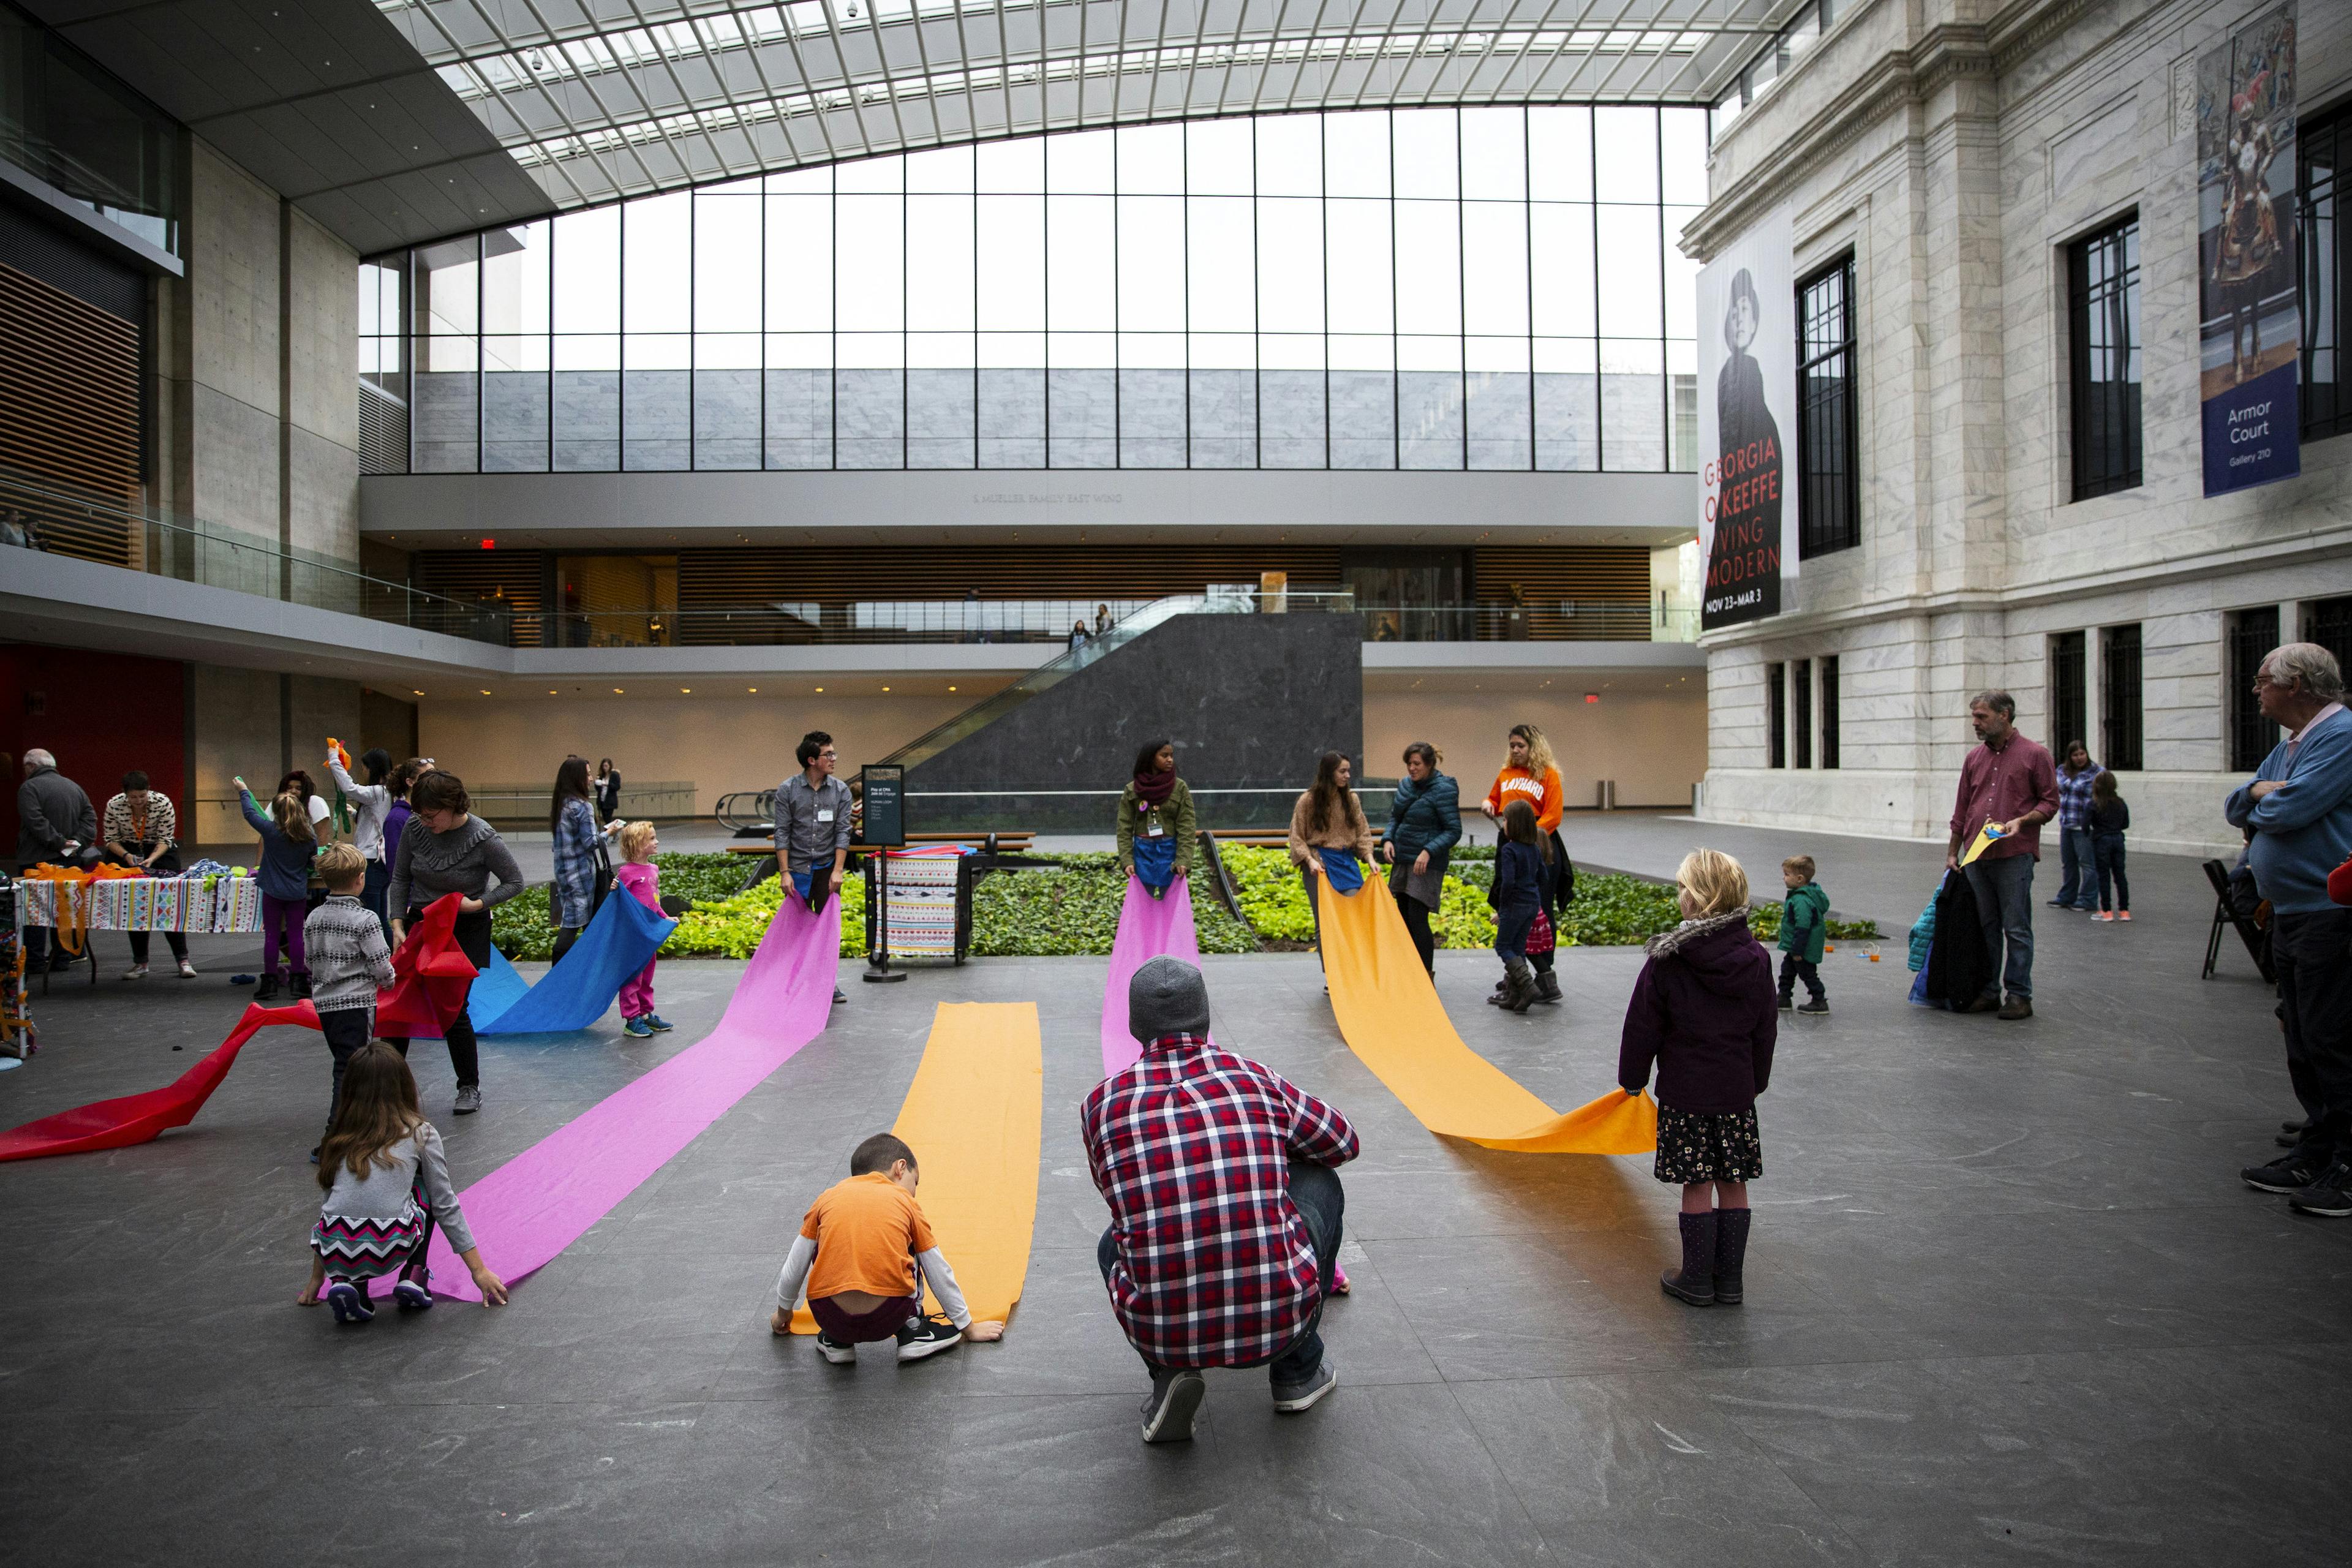 Families playing with large strips of fabric in the atrium